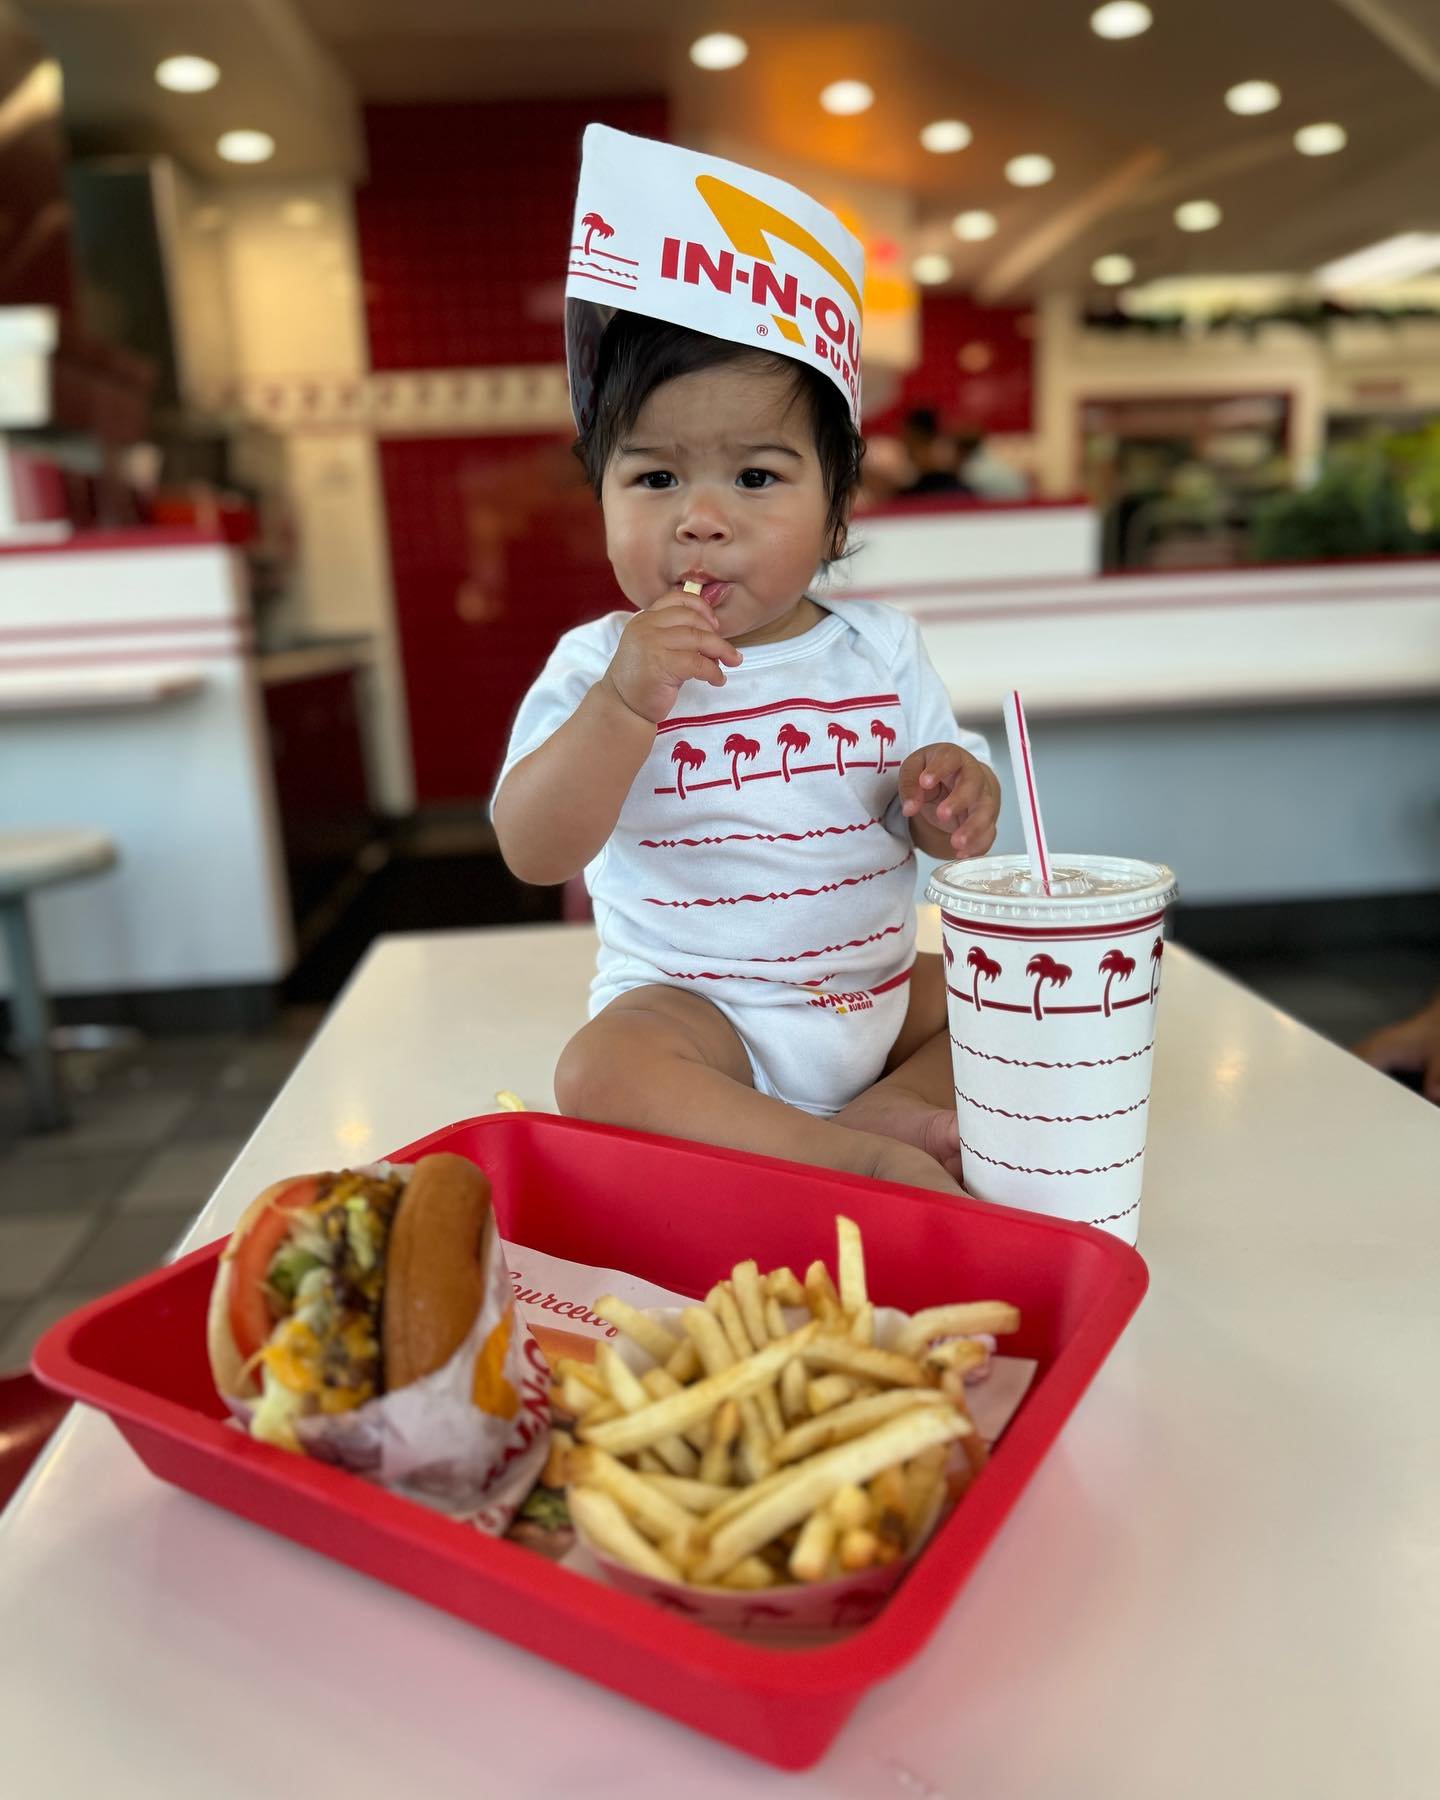 9 months IN-N-OUT 🌴 ☀️ 🍔 

You know we had to!! @innout 

#innout #california #losangeles